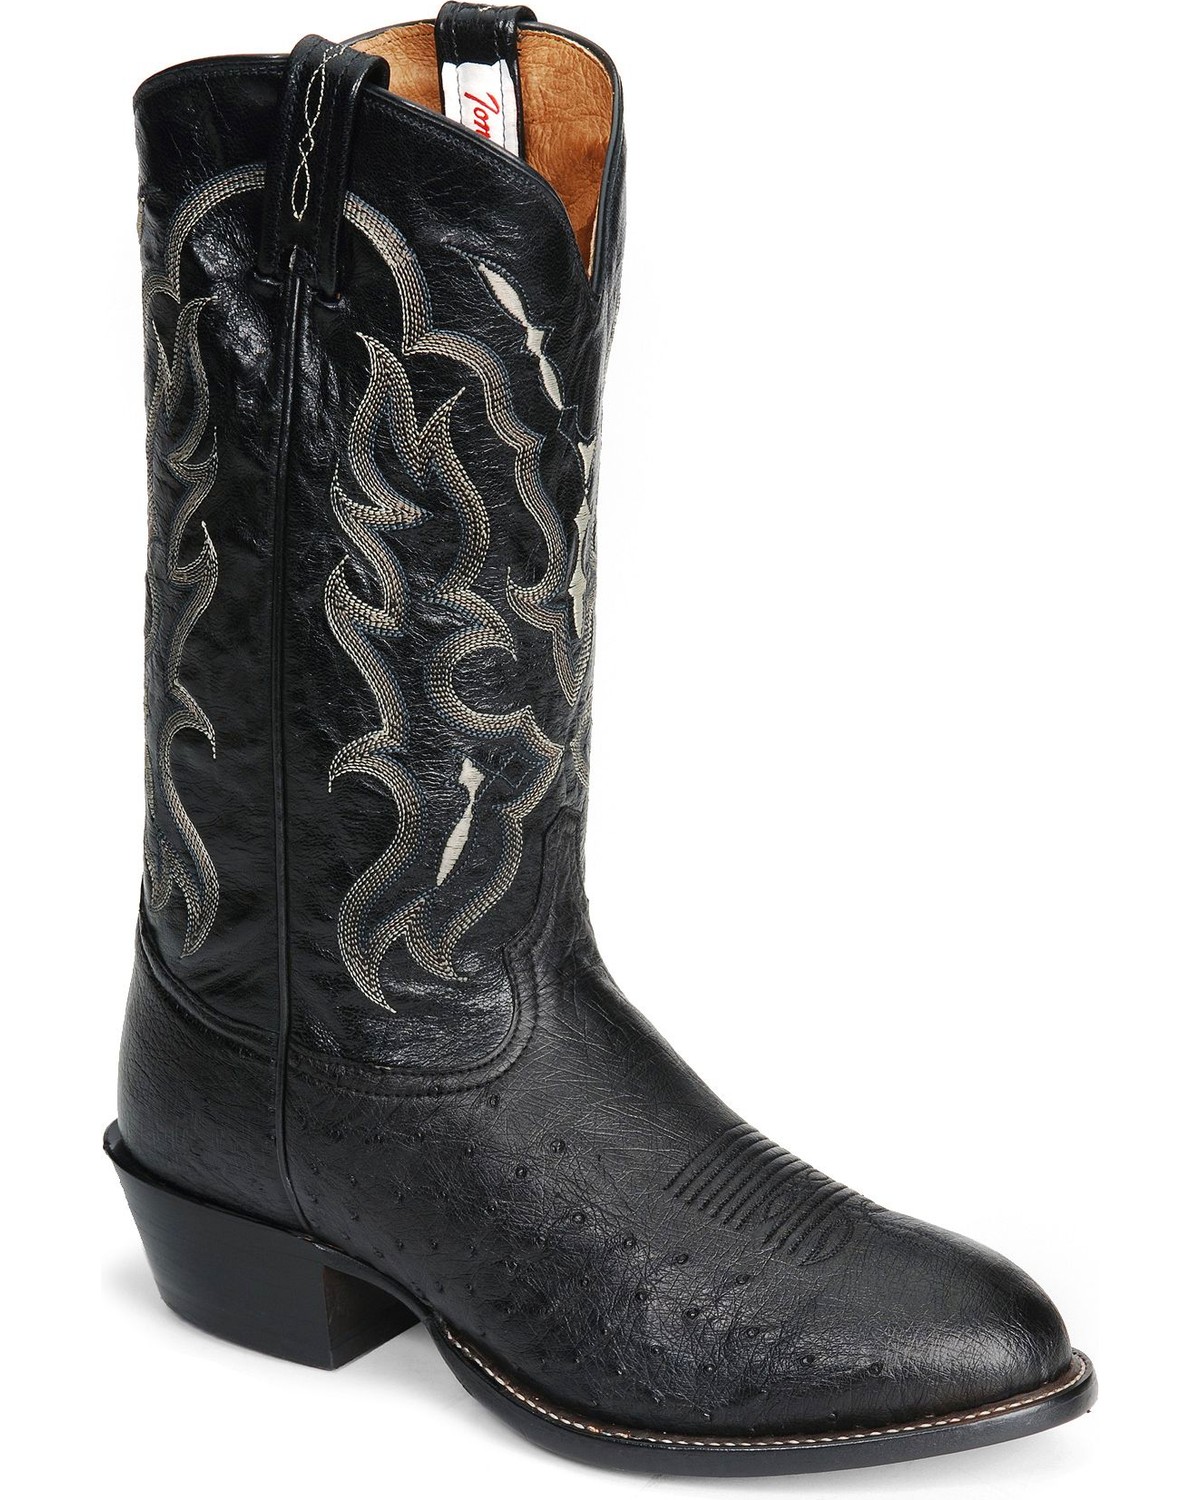 Tony Lama Men's Smooth Ostrich Exotic Boots | Boot Barn